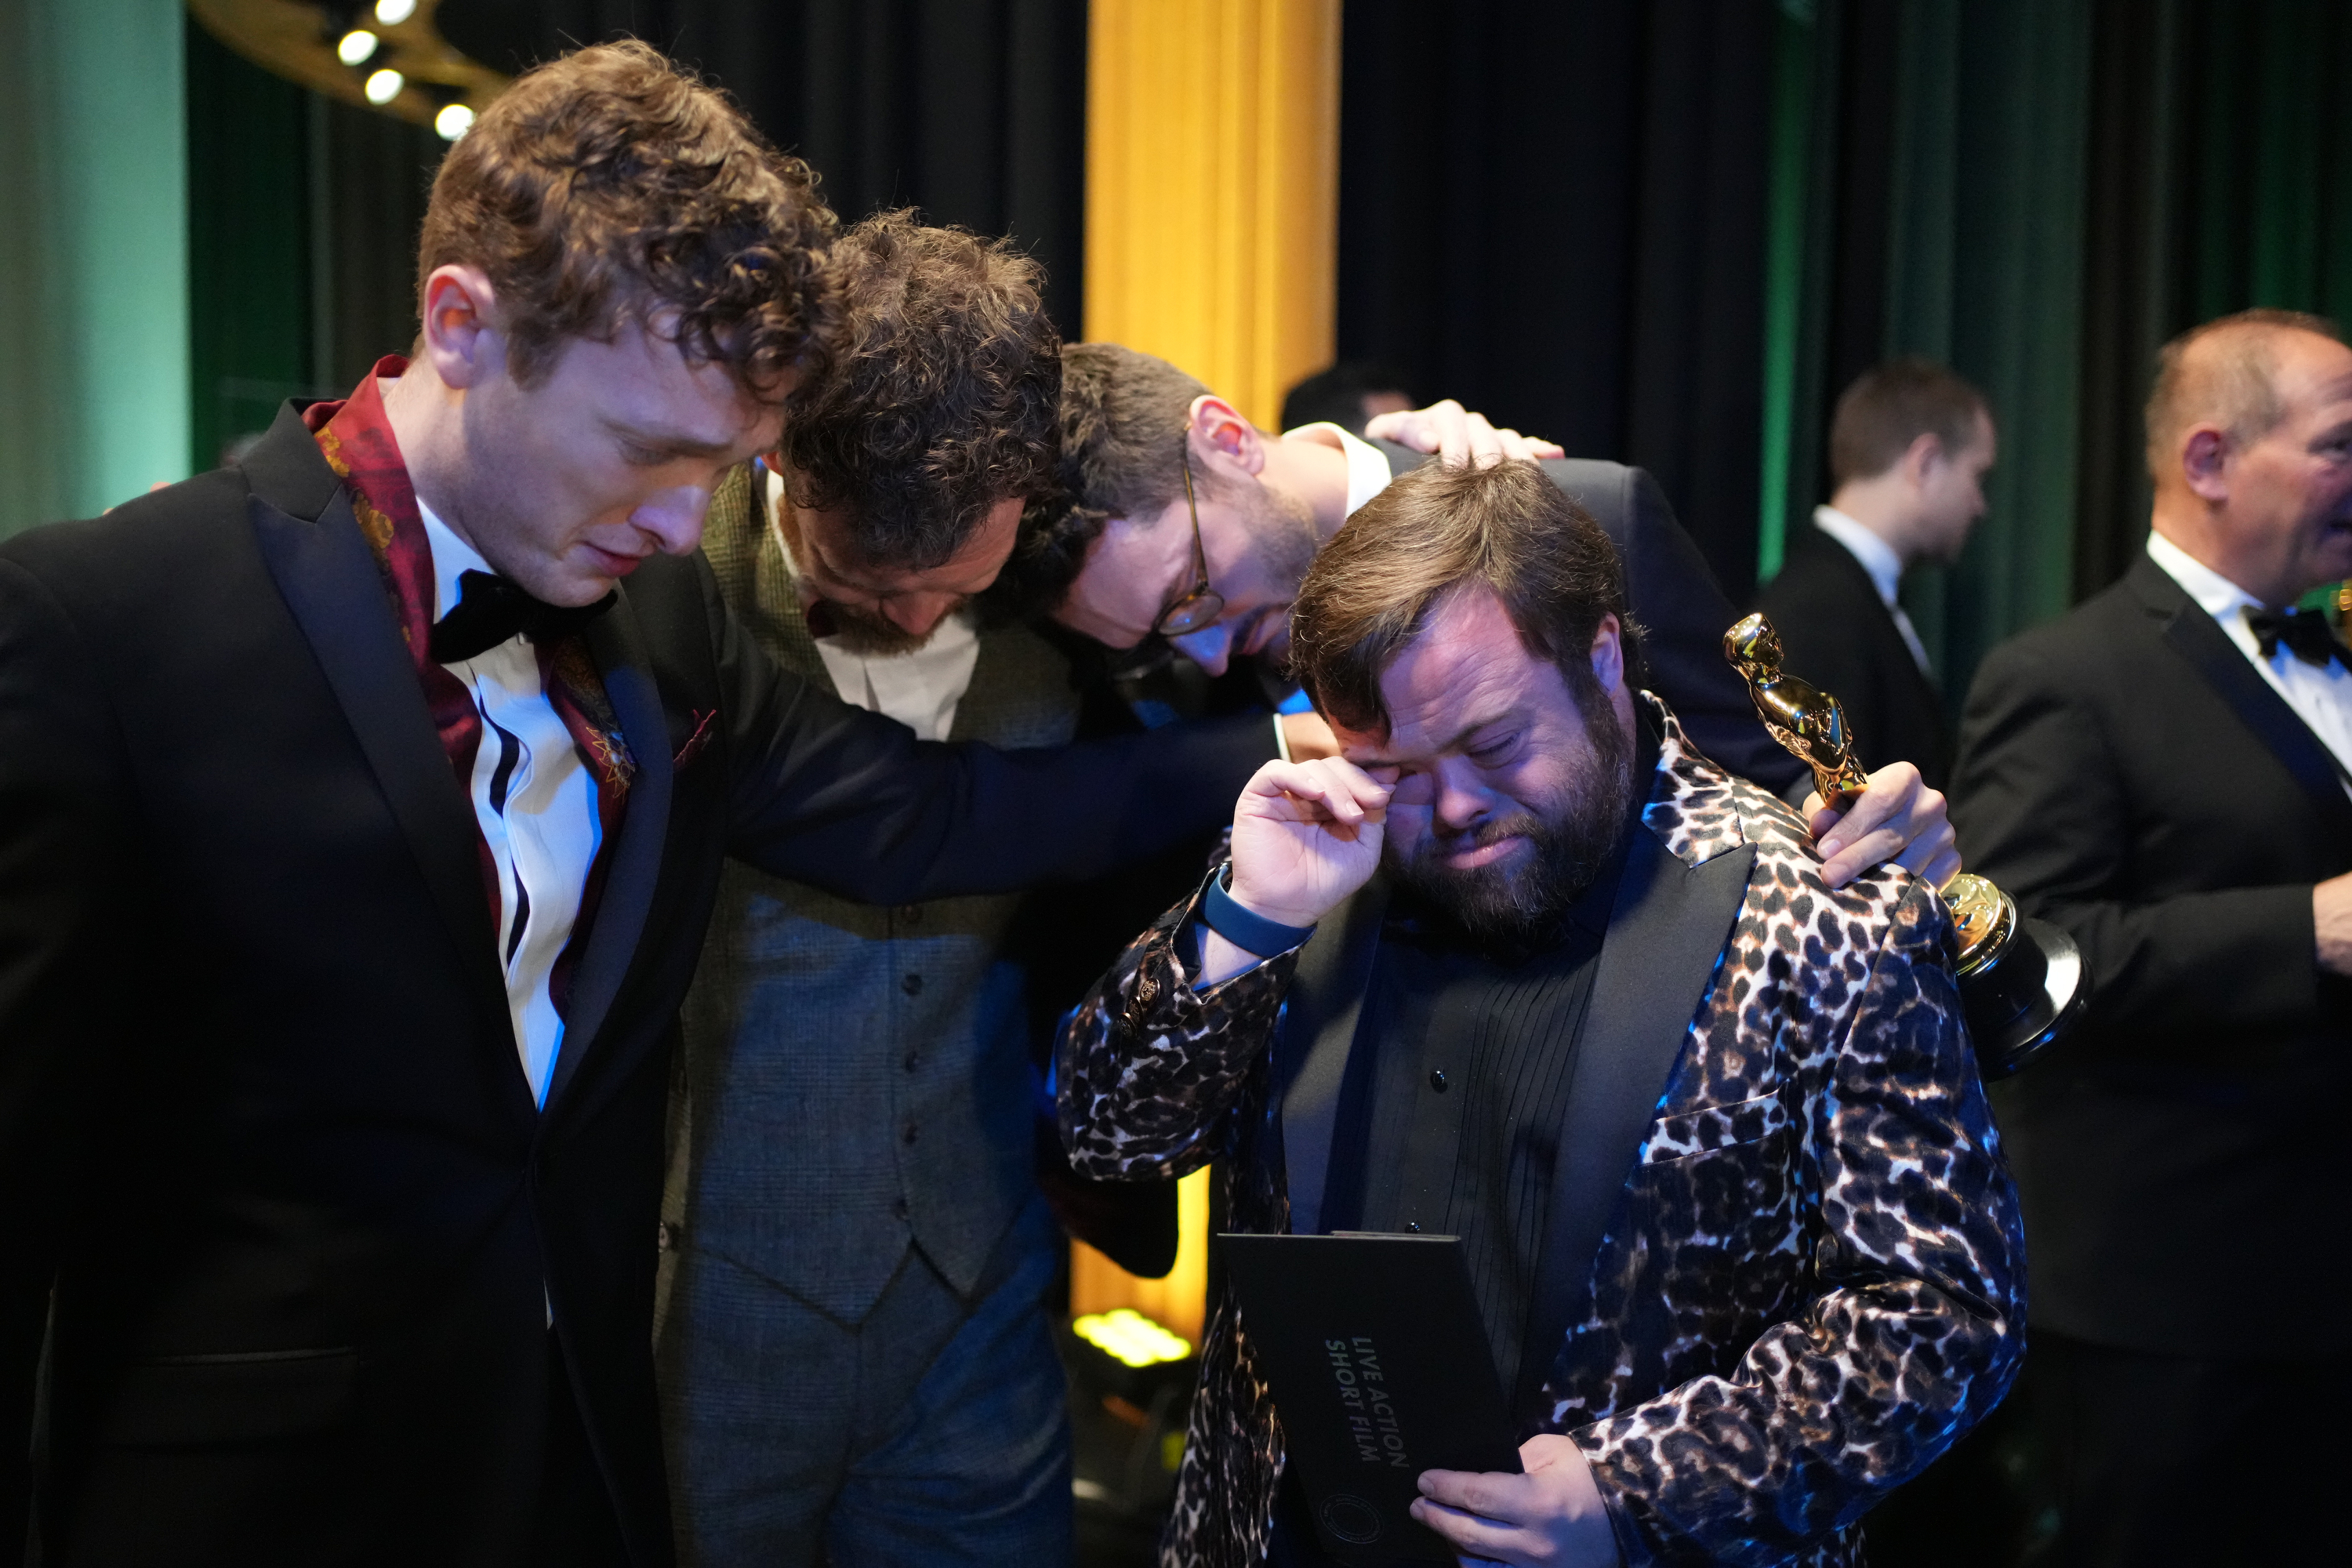 Ross White, Seamus O'Hara, Tom Berkeley and James Martin share an emotional moment backstage after "The Irish Goodbye" won the Oscar for best live action short film. 